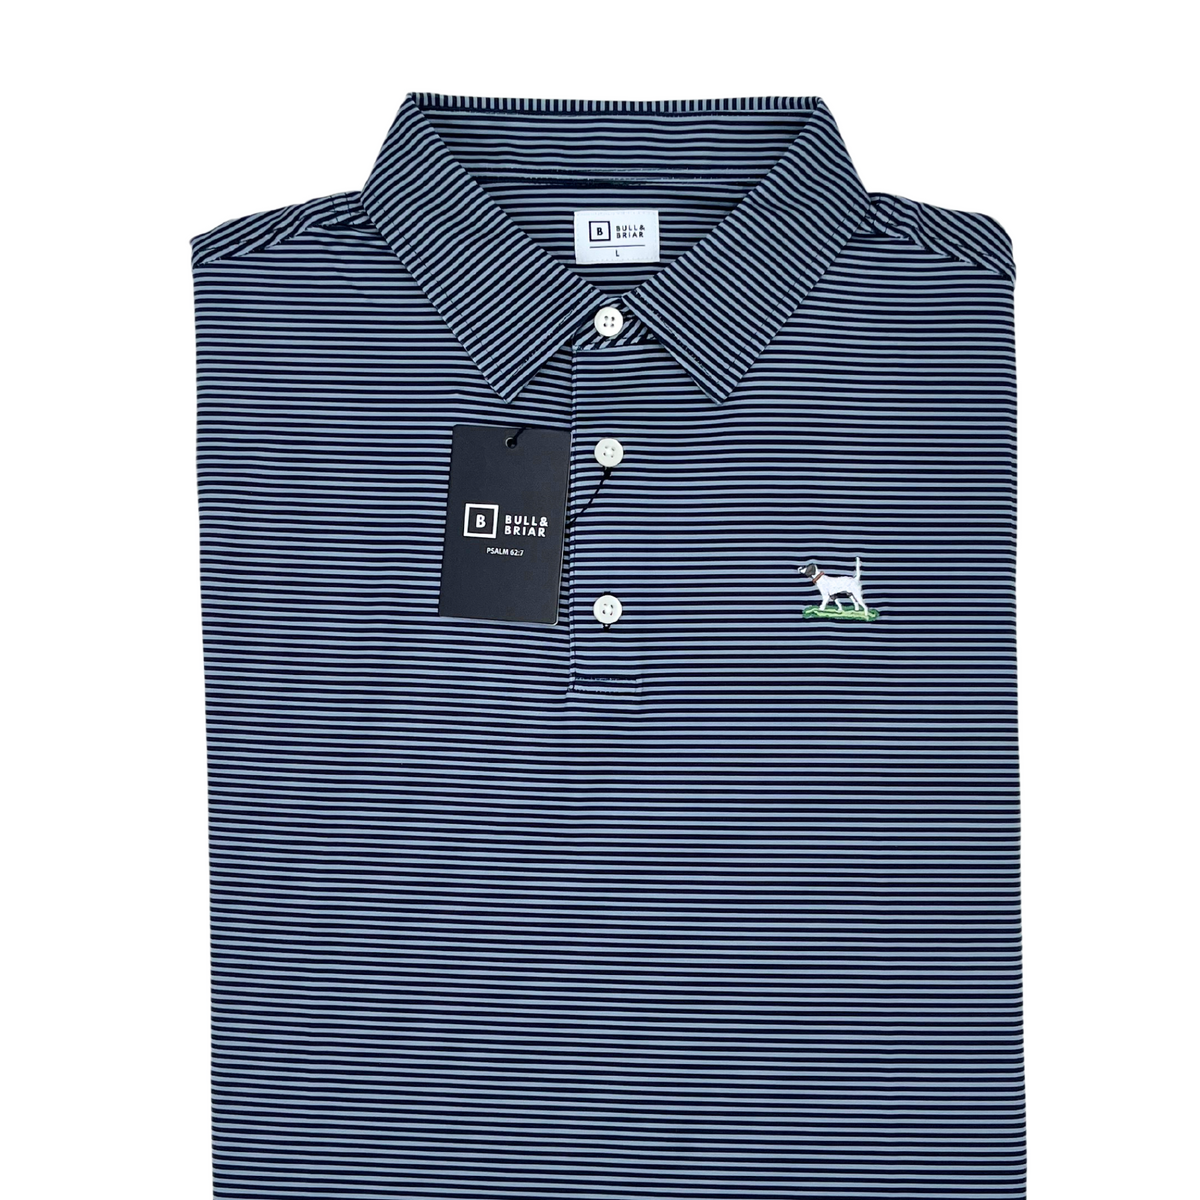 Wrinkle-Free English Pointer Polo Shirt in Navy